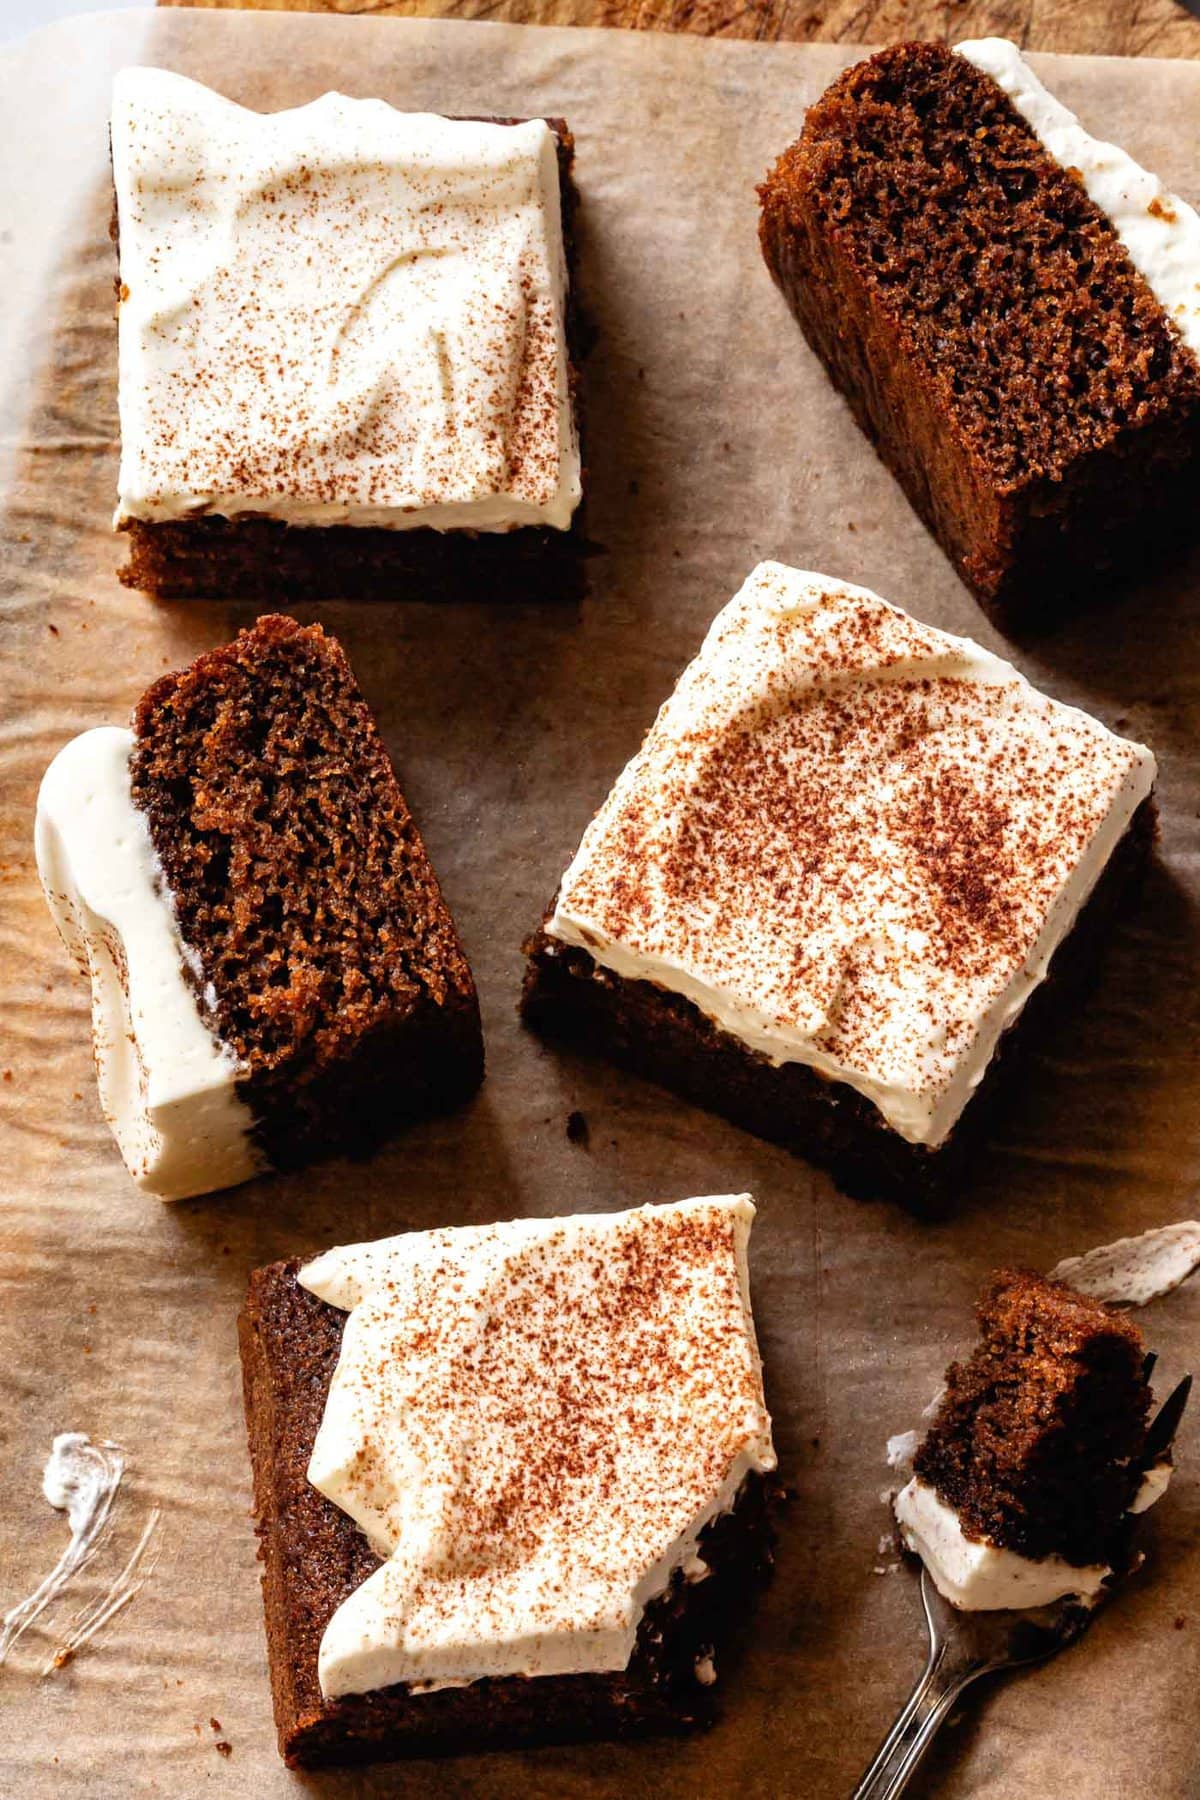 slices of gluten-free gingerbread cake have been placed haphazardly on a wooden serving board